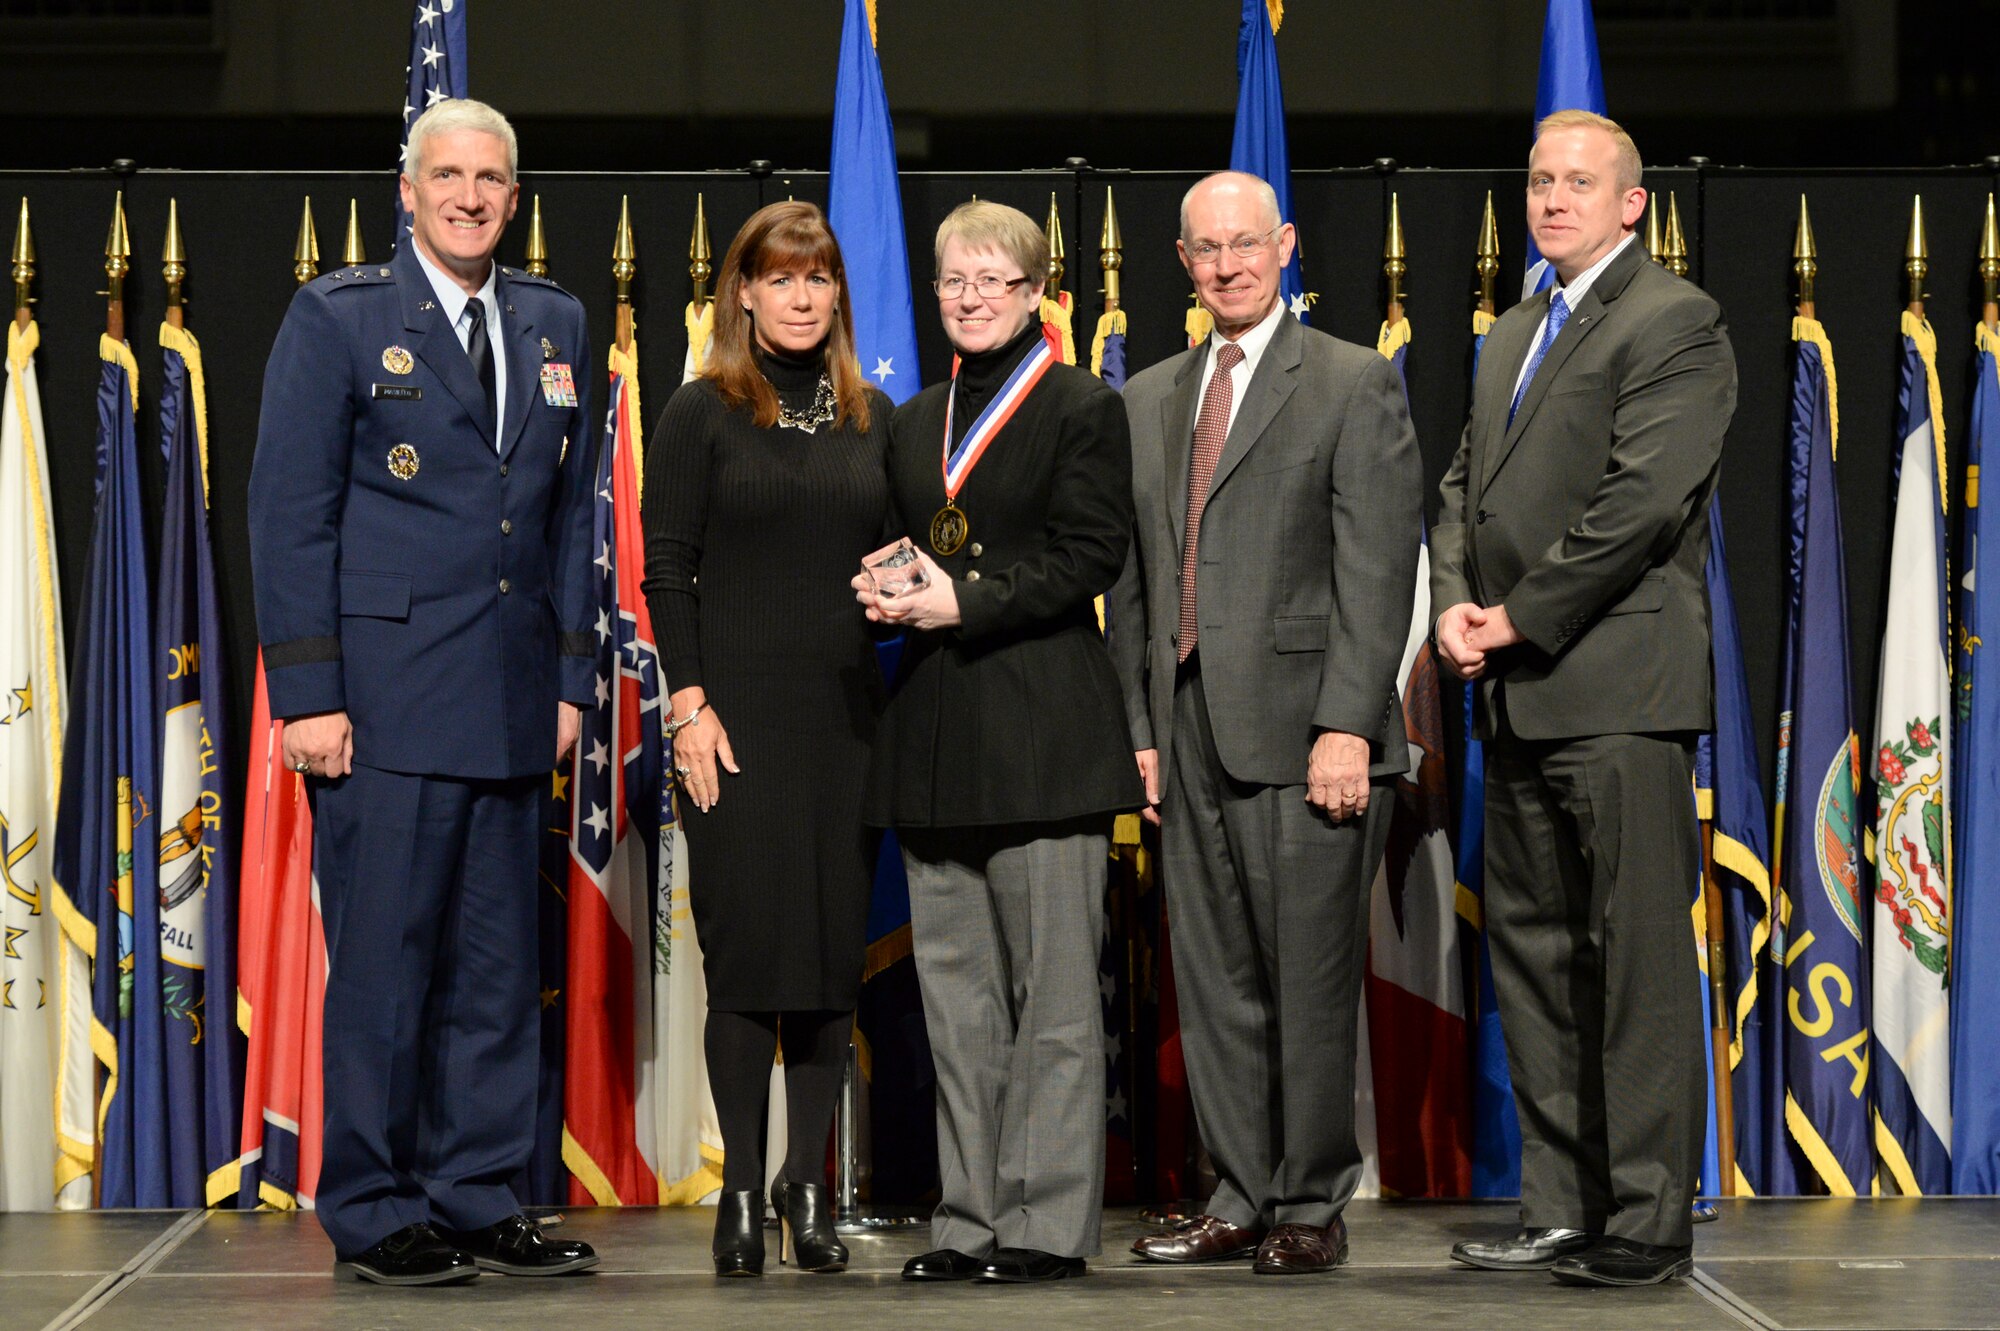 Ms. Stephanie Miller, chief, Radio Frequency Bioeffects Branch, 711th Human Performance Wing, and her sister Natalie, are honored during the 2014 Air Force Research Laboratory Fellows and Early Career Awards Banquet Oct. 30 at the National Museum of the U.S. Air Force.  Joining them are Maj. Gen. Tom Masiello, AFRL commander, retired Maj. Gen. Dick Paul, AFRL's first commander, and Dr. Morley Stone, AFRL chief technology officer. (U.S. Air Force photo/Wesley Farnsworth)